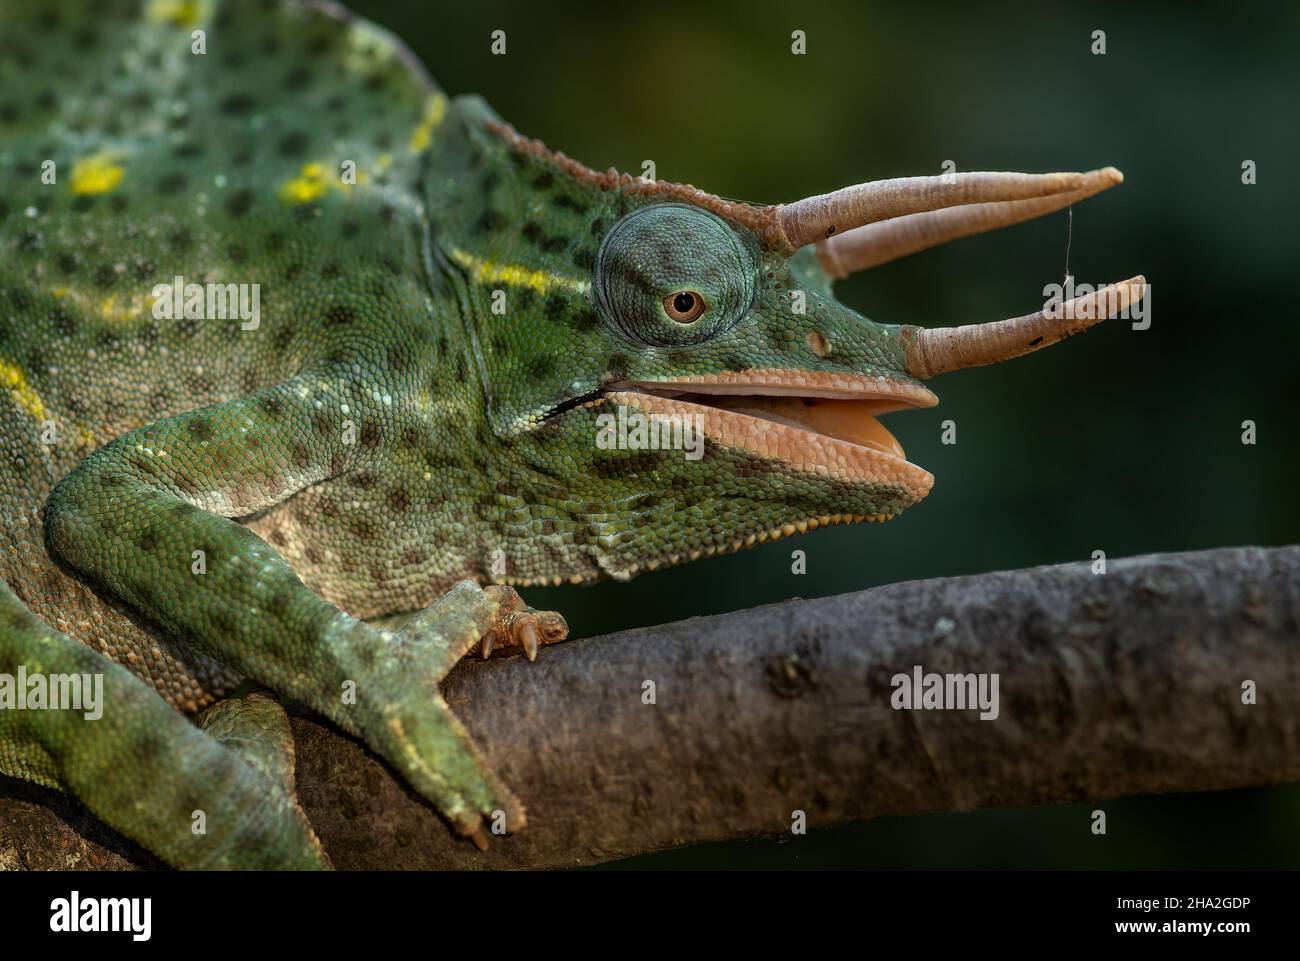 Usambara Three-horned Chameleon - Trioceros deremensis, beautiful special lizard from African bushes and forests, Tanzania. Stock Photo